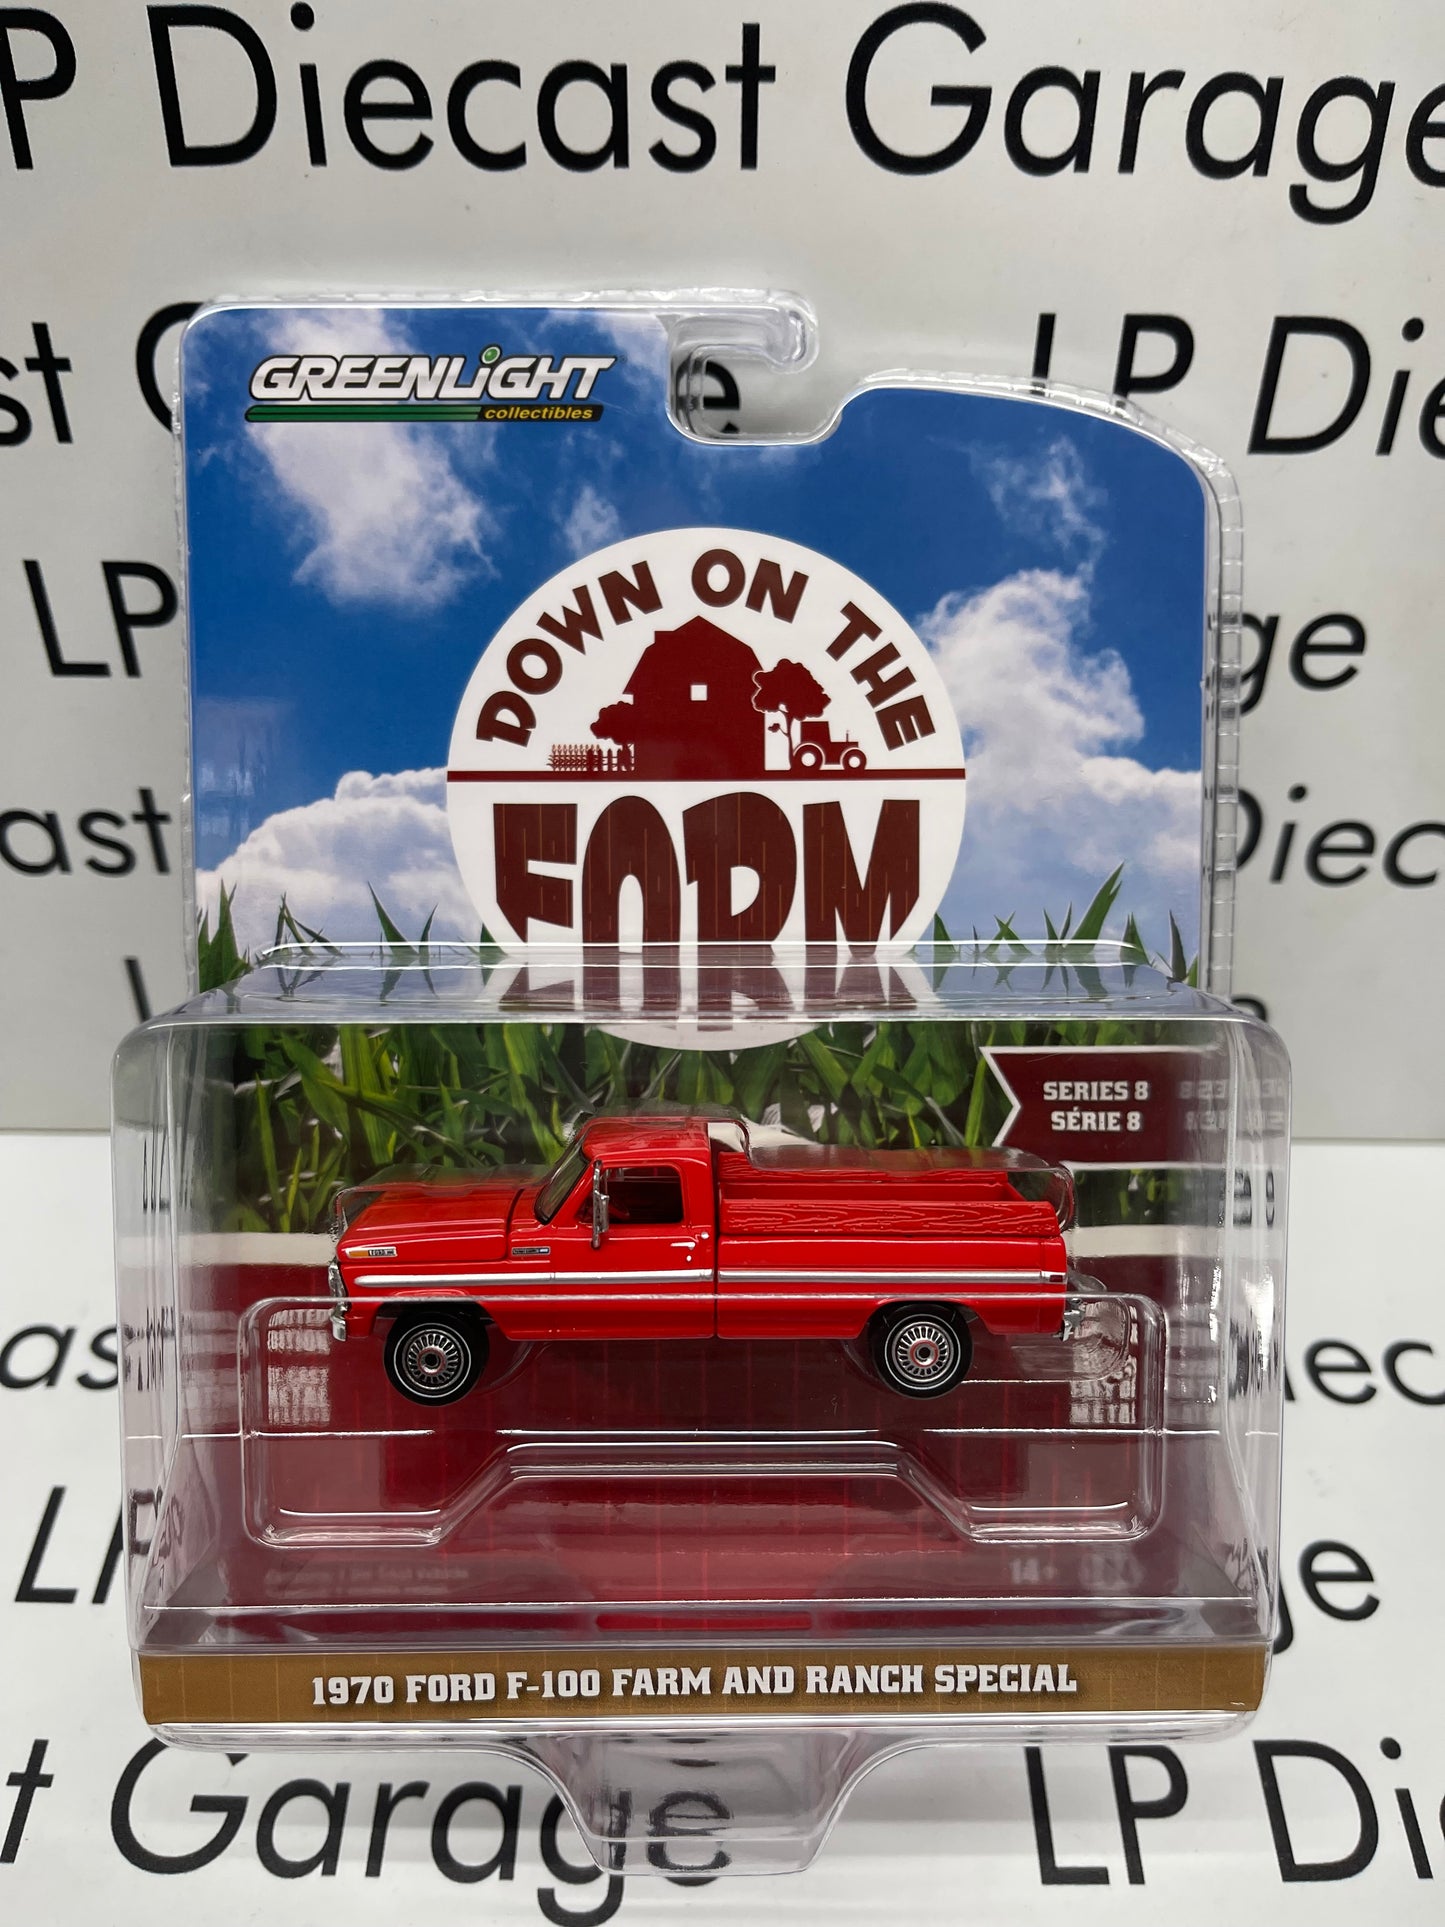 GREENLIGHT 1970 Ford F-100 Farm & Ranch Special w/ Cargo Boards Candy Apple Red Down on The Farm 1:64 Diecast